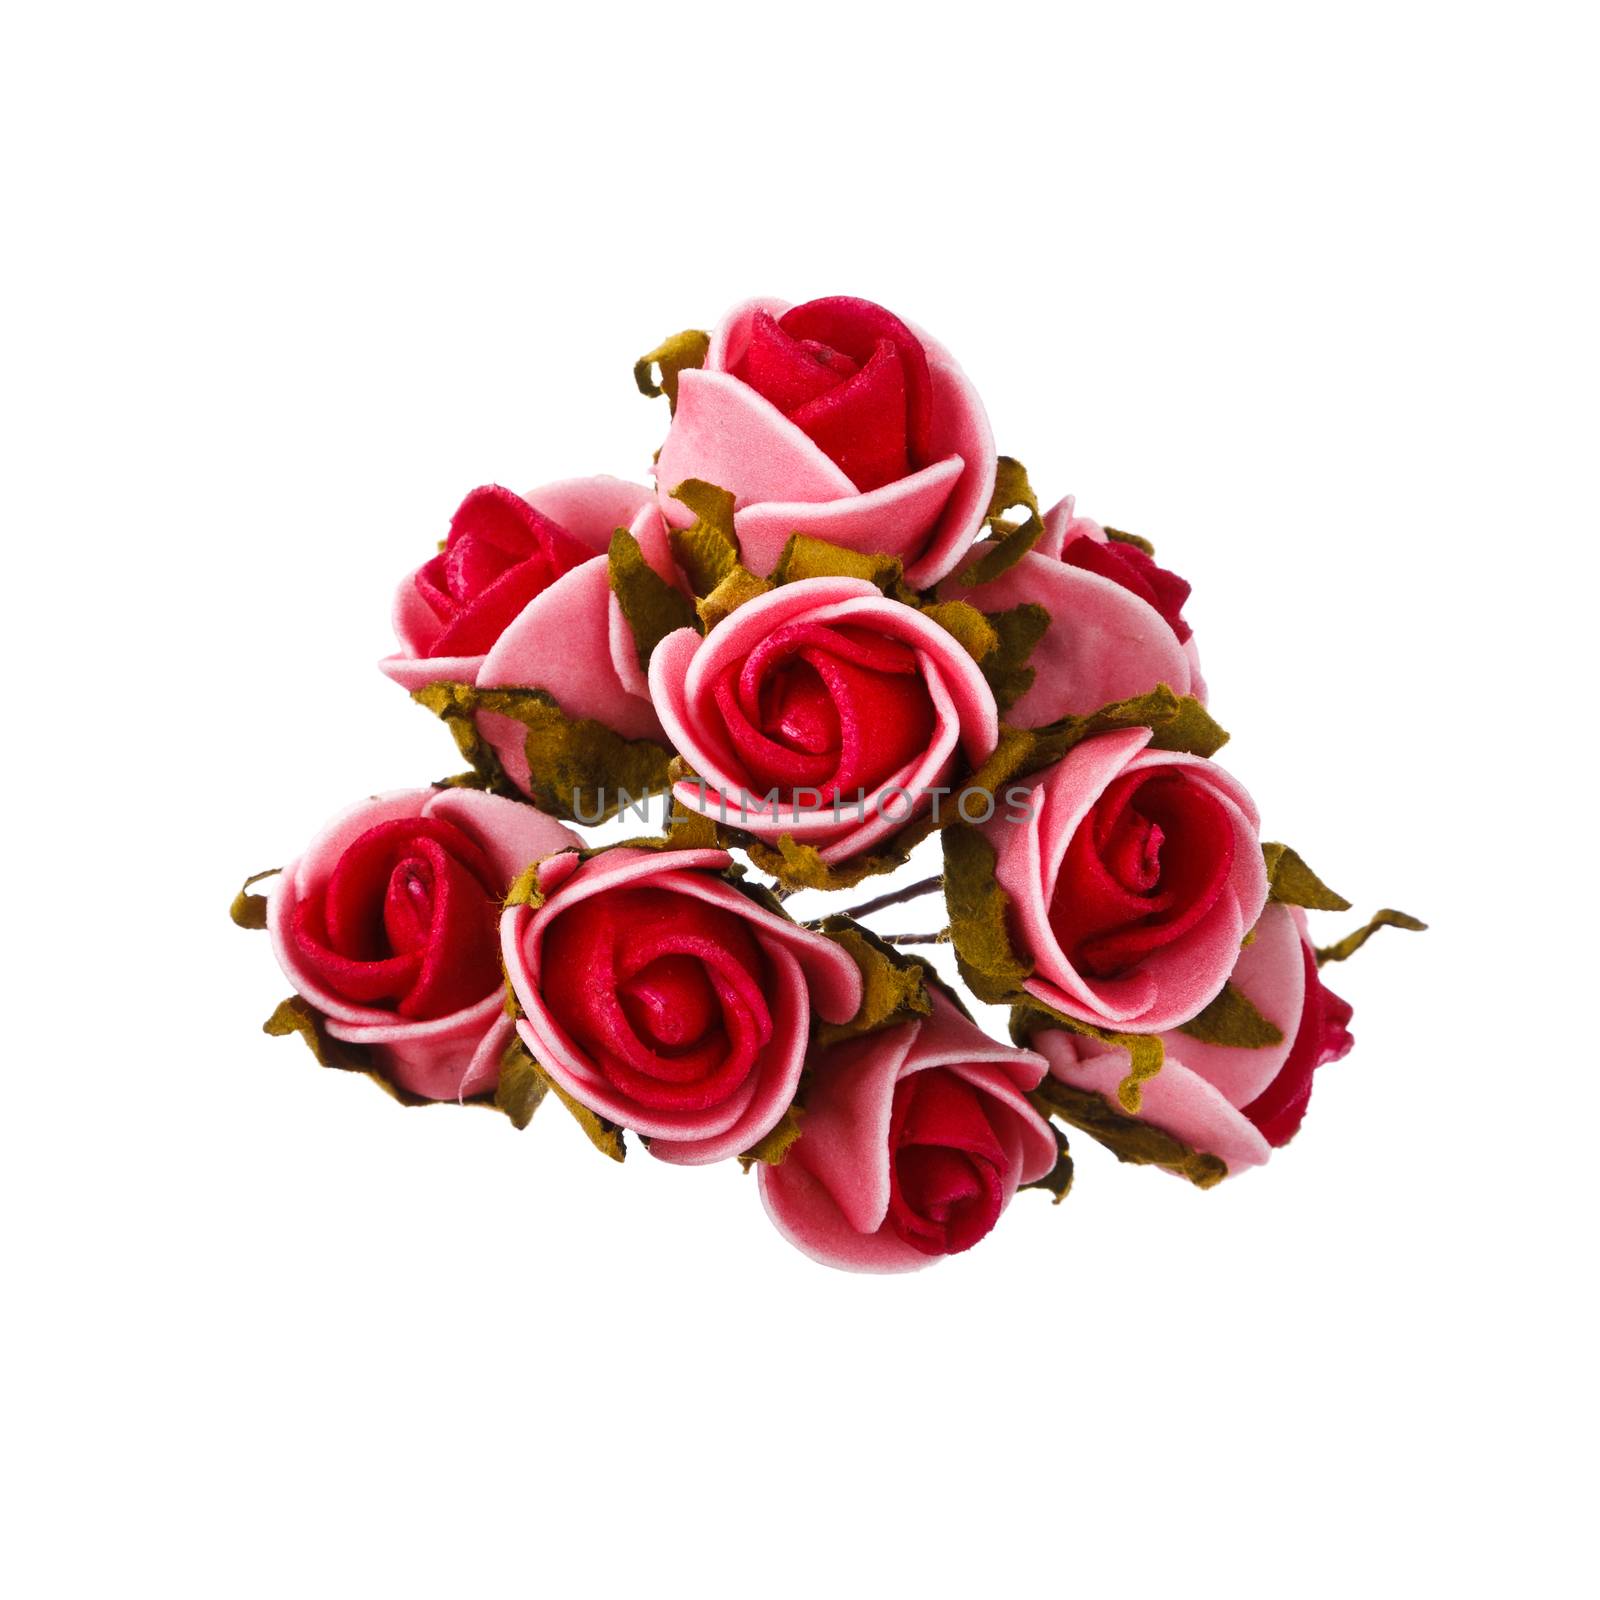 bouquet of red and pink roses isolated on white background